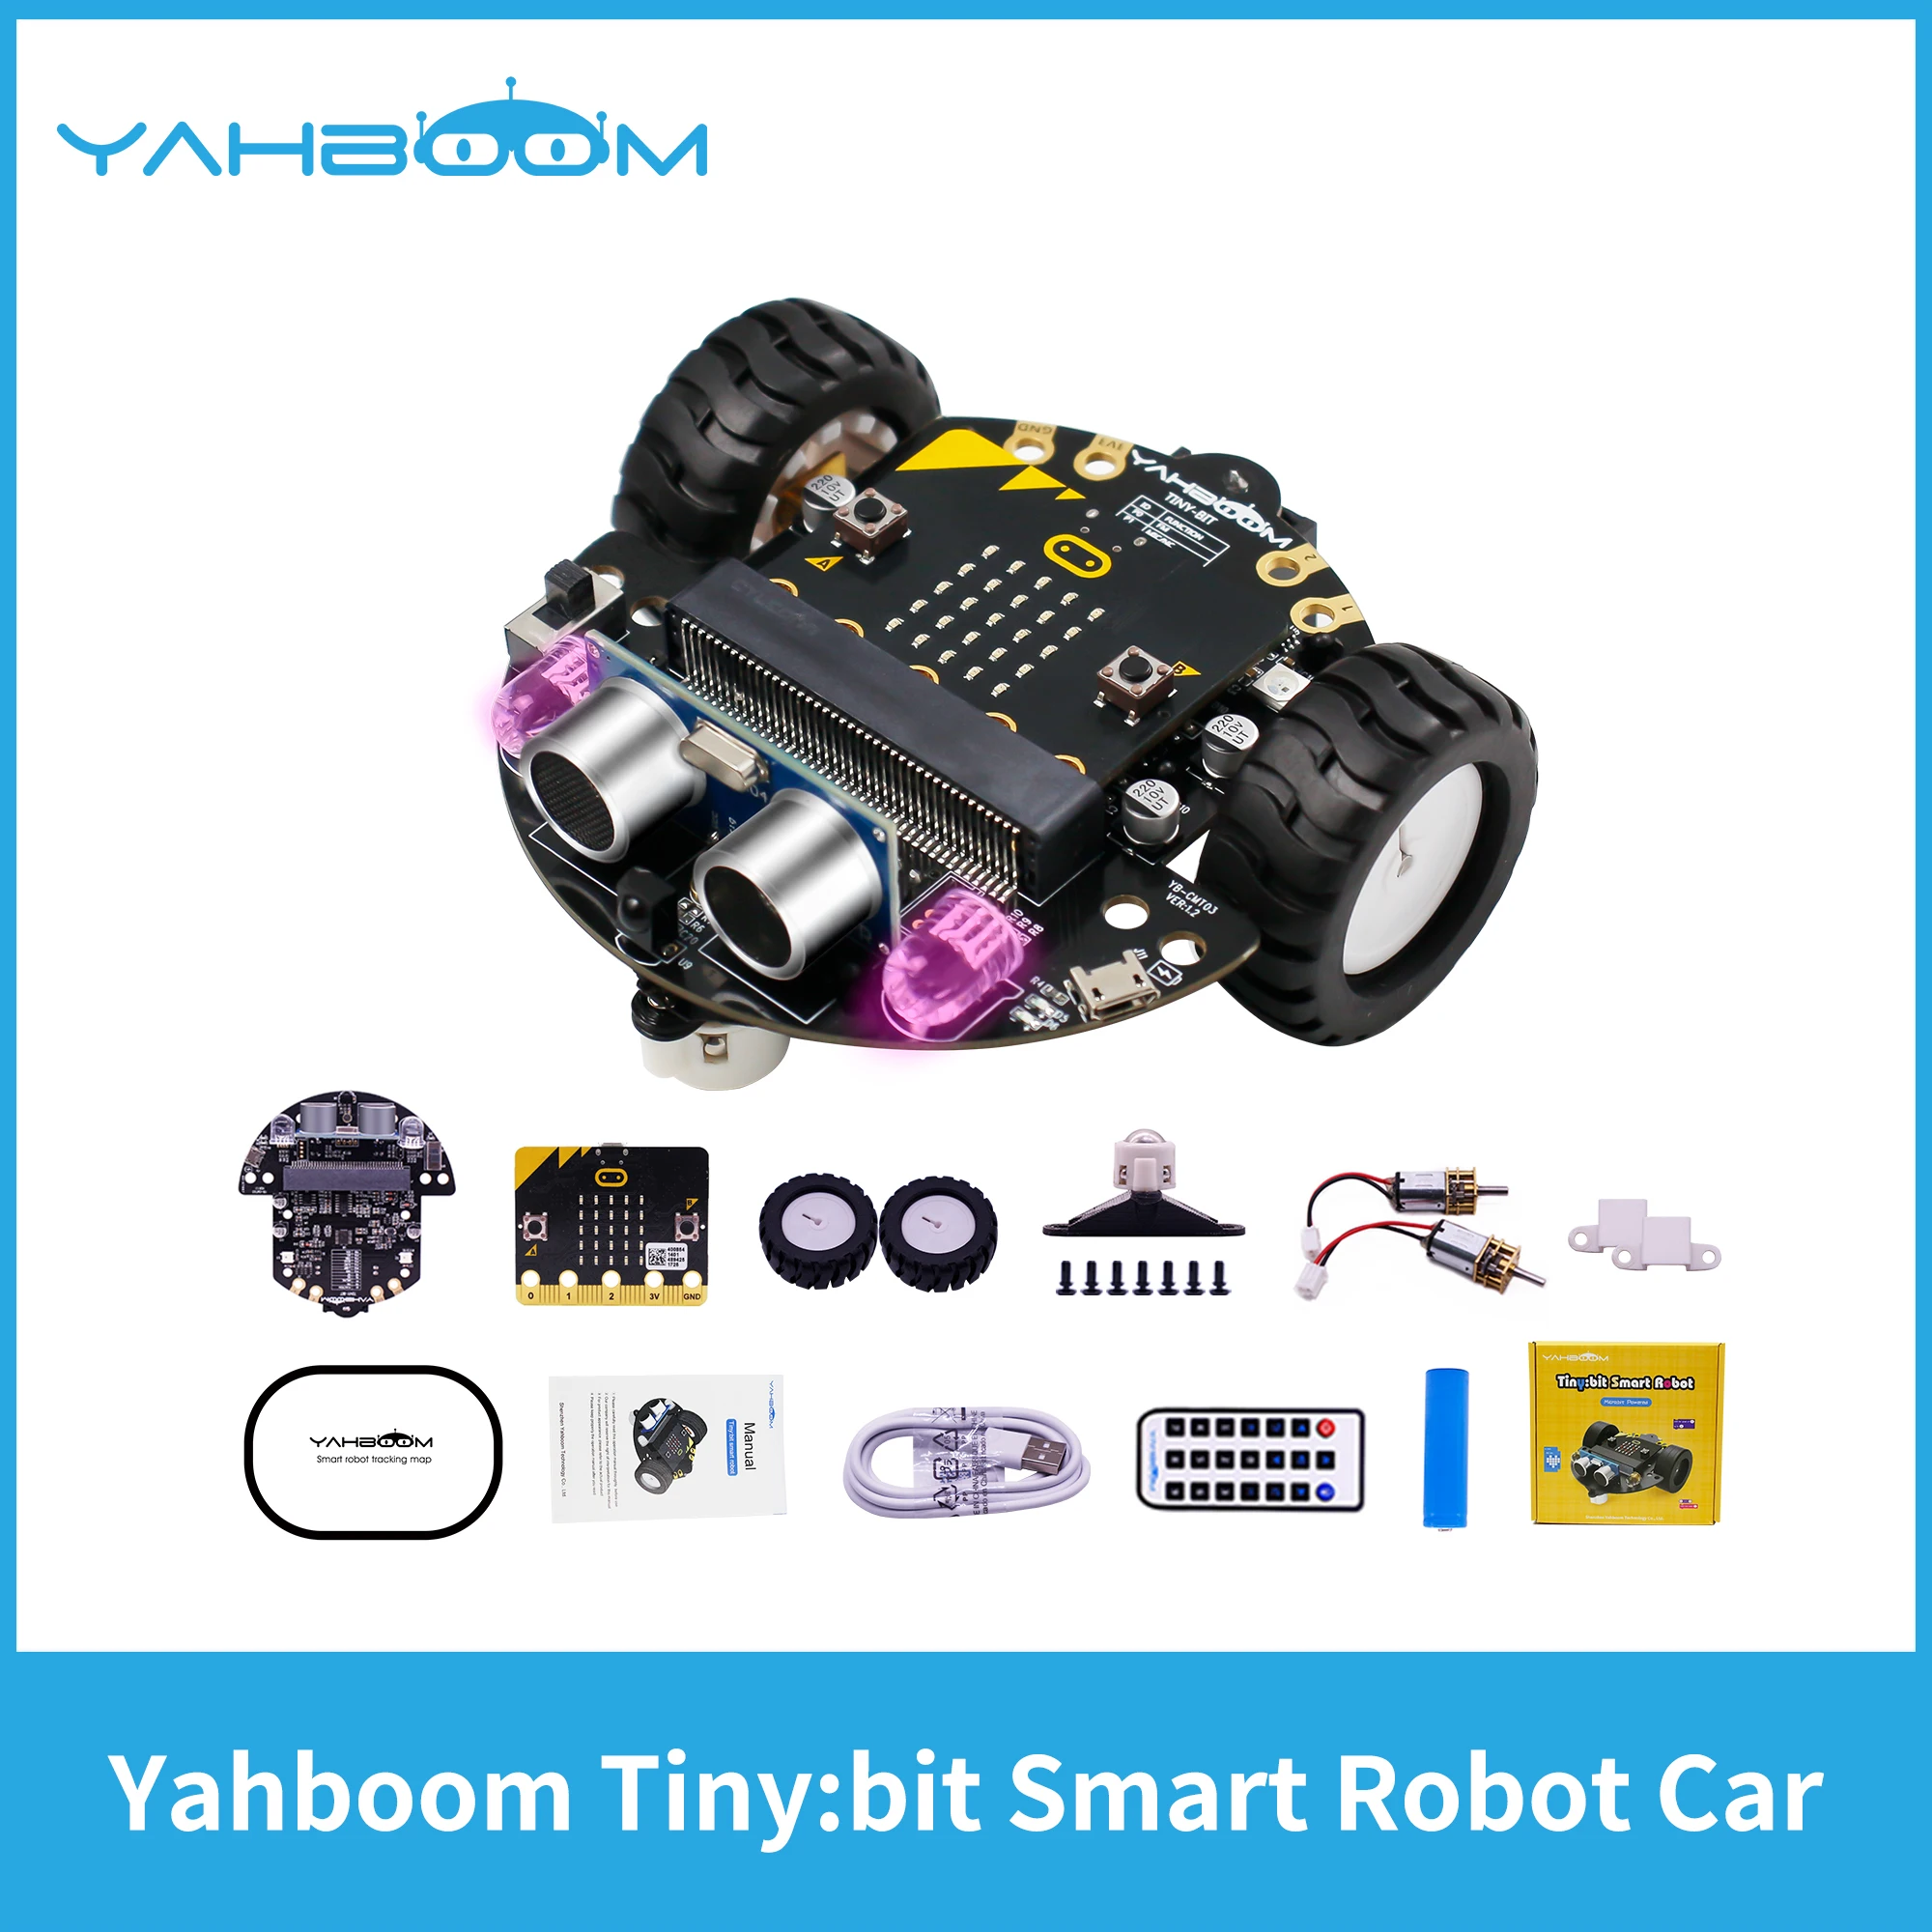 Yahboom Robot Programmable Robotic kit based on BBC Microbit V2 and V1 for STEM Coding Education with Chargeable Battery